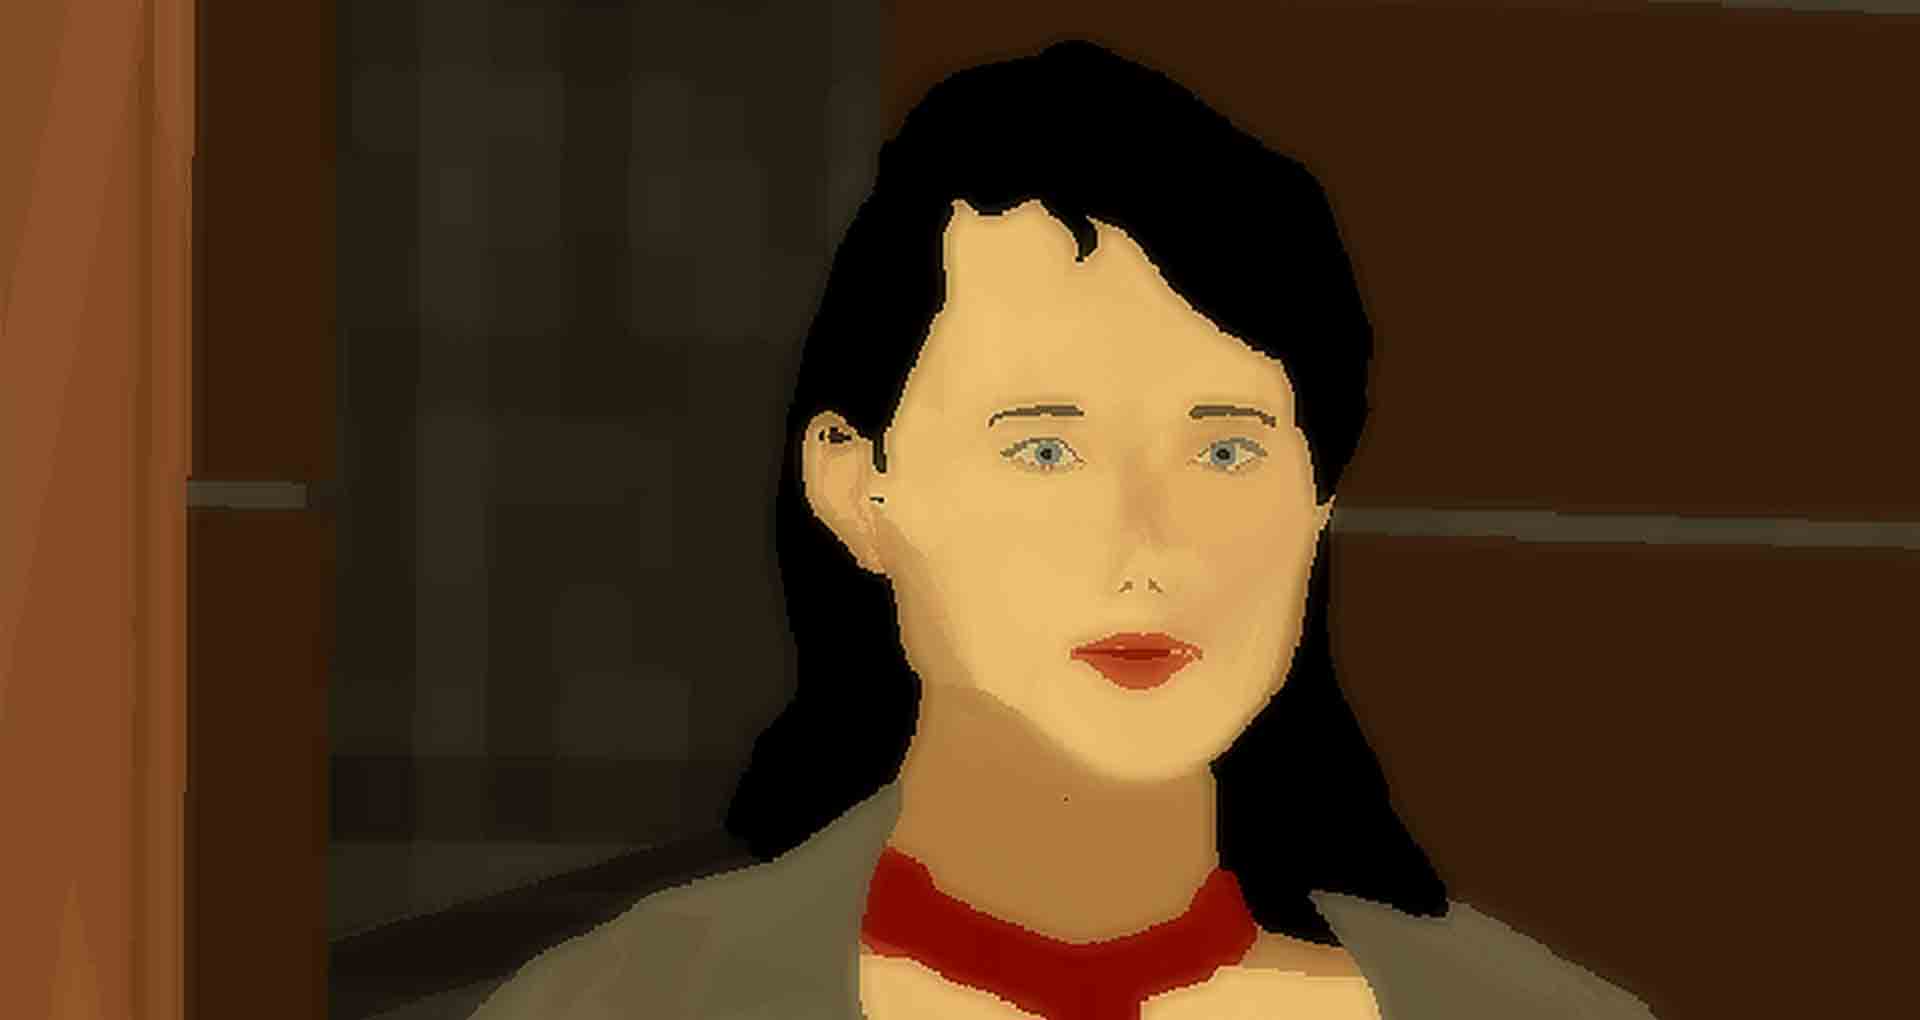 image drawn by computer. A woman with black hair in front.